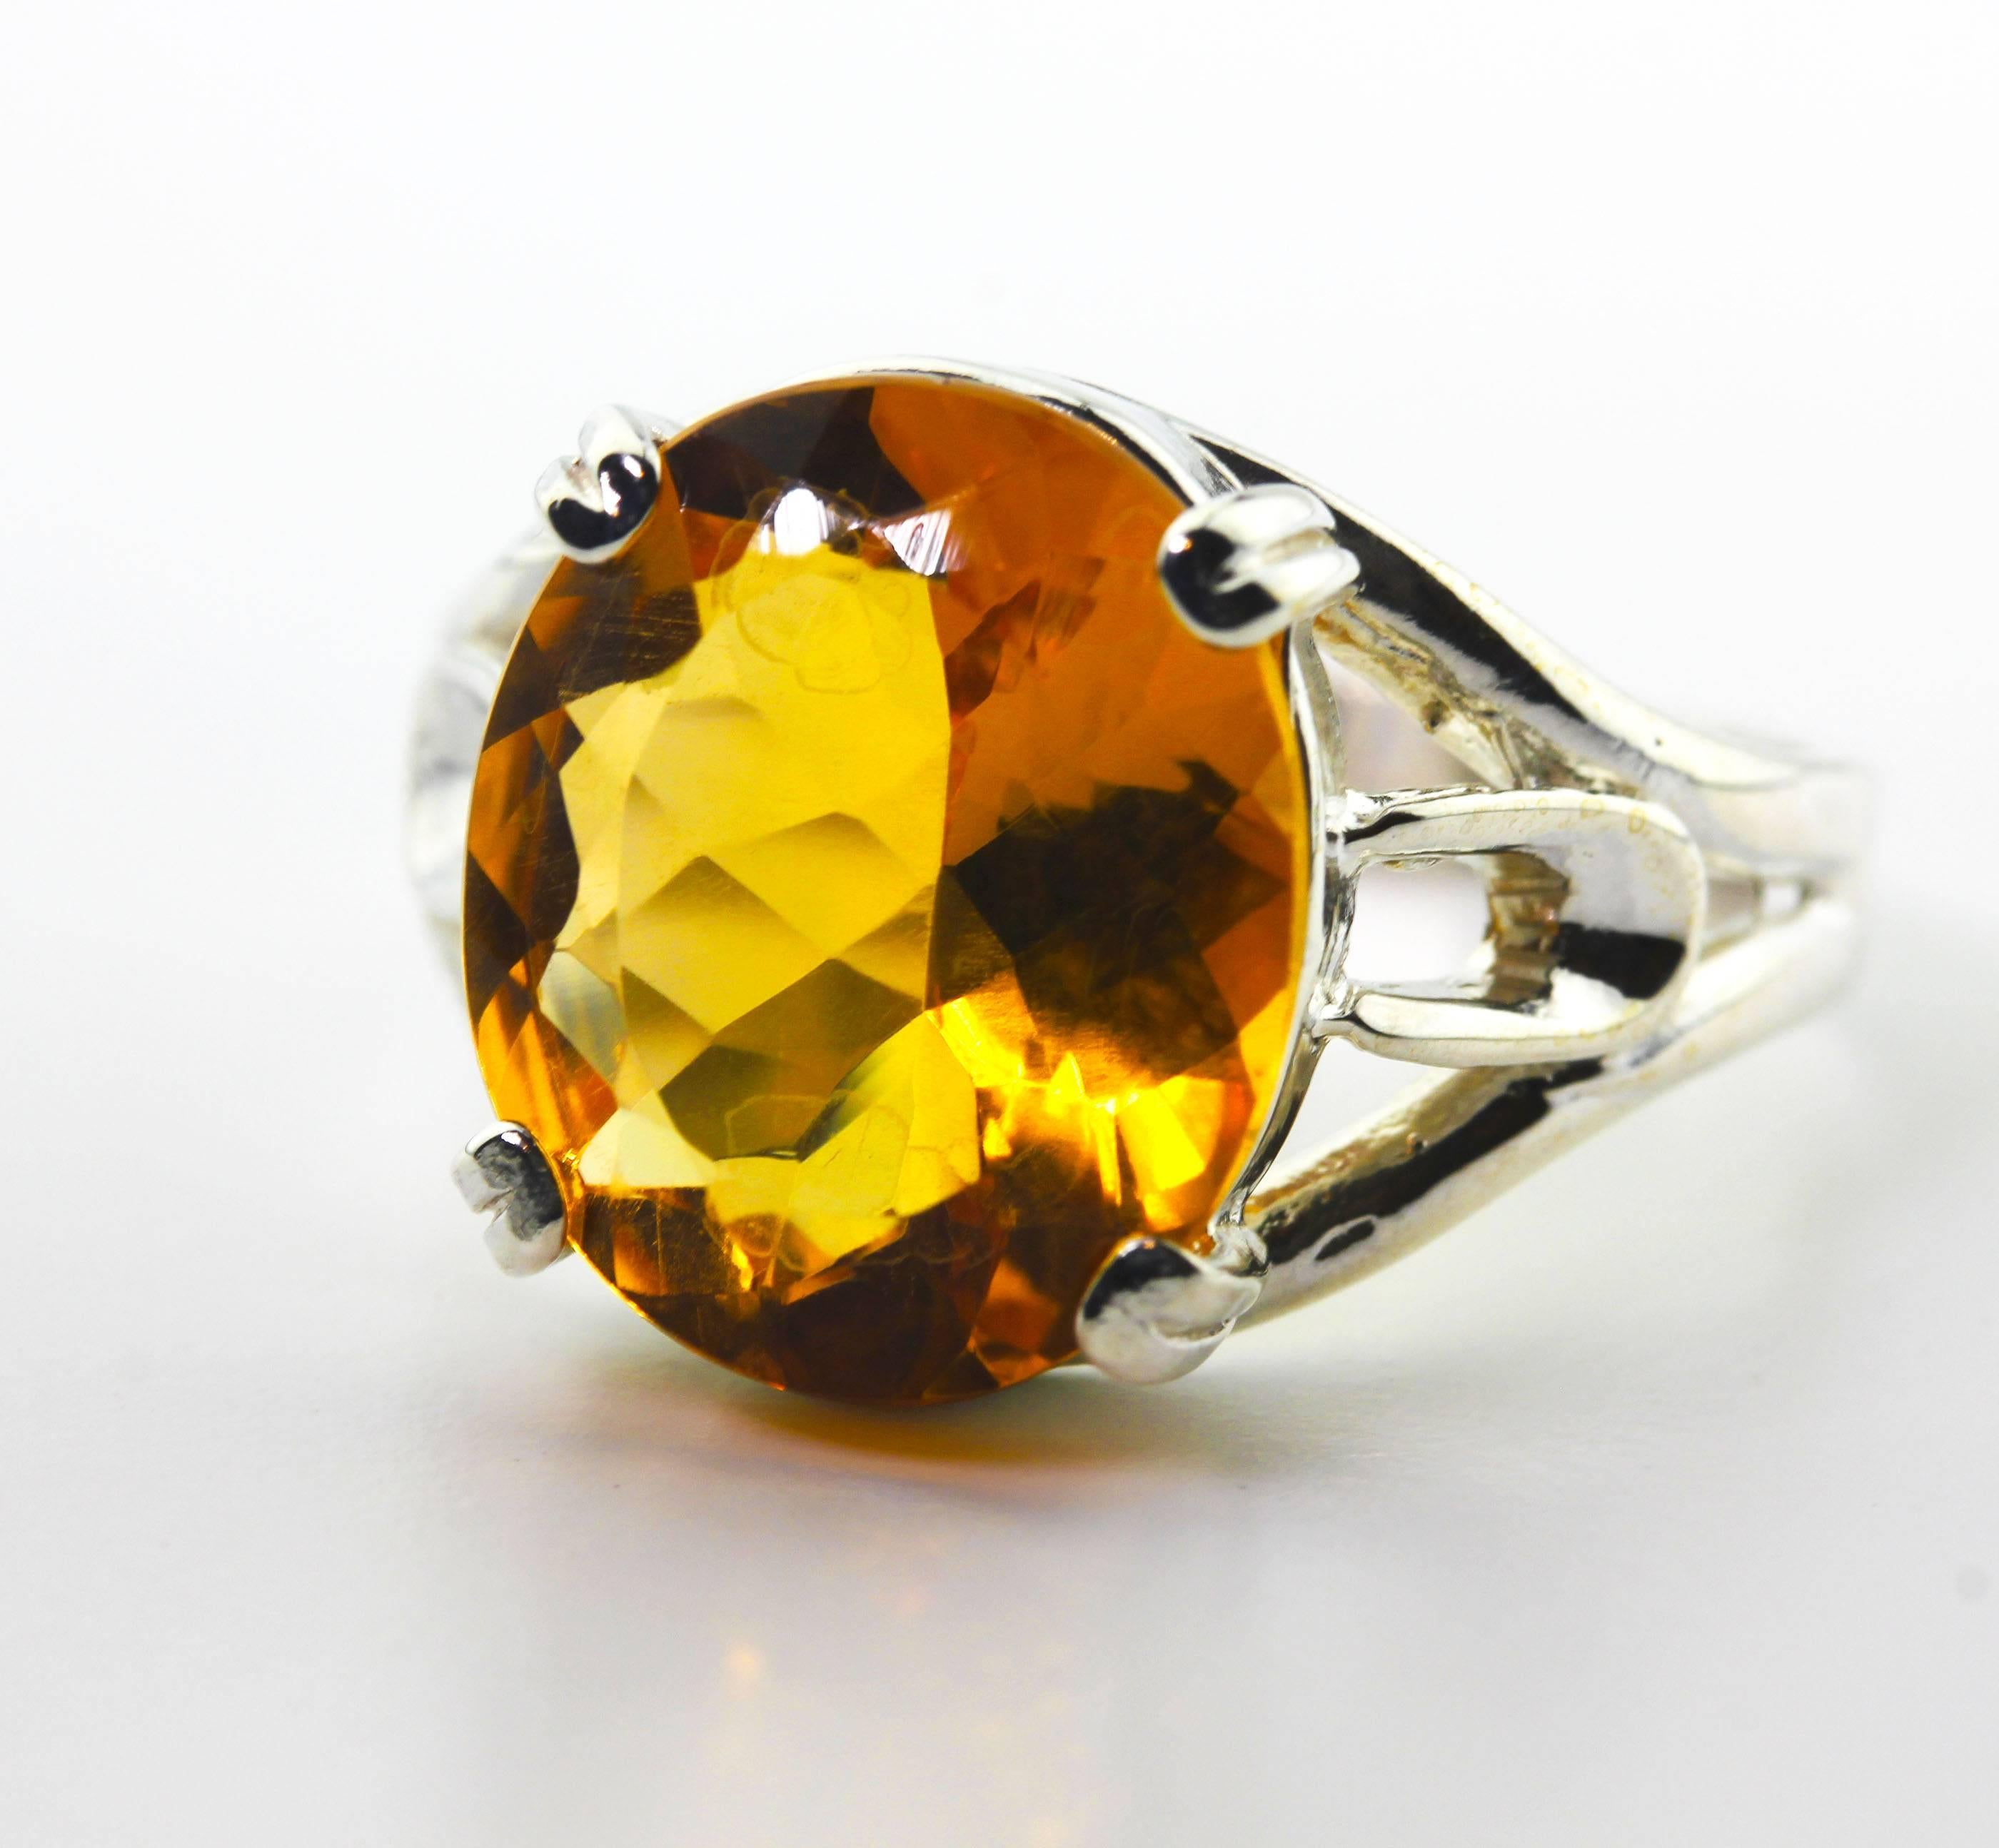 Brilliant gold color natural 5.89 carat clear Brazilian Citrine (14.18 mm x 12.18 mm) set in a sterling silver ring size 9 (sizable).